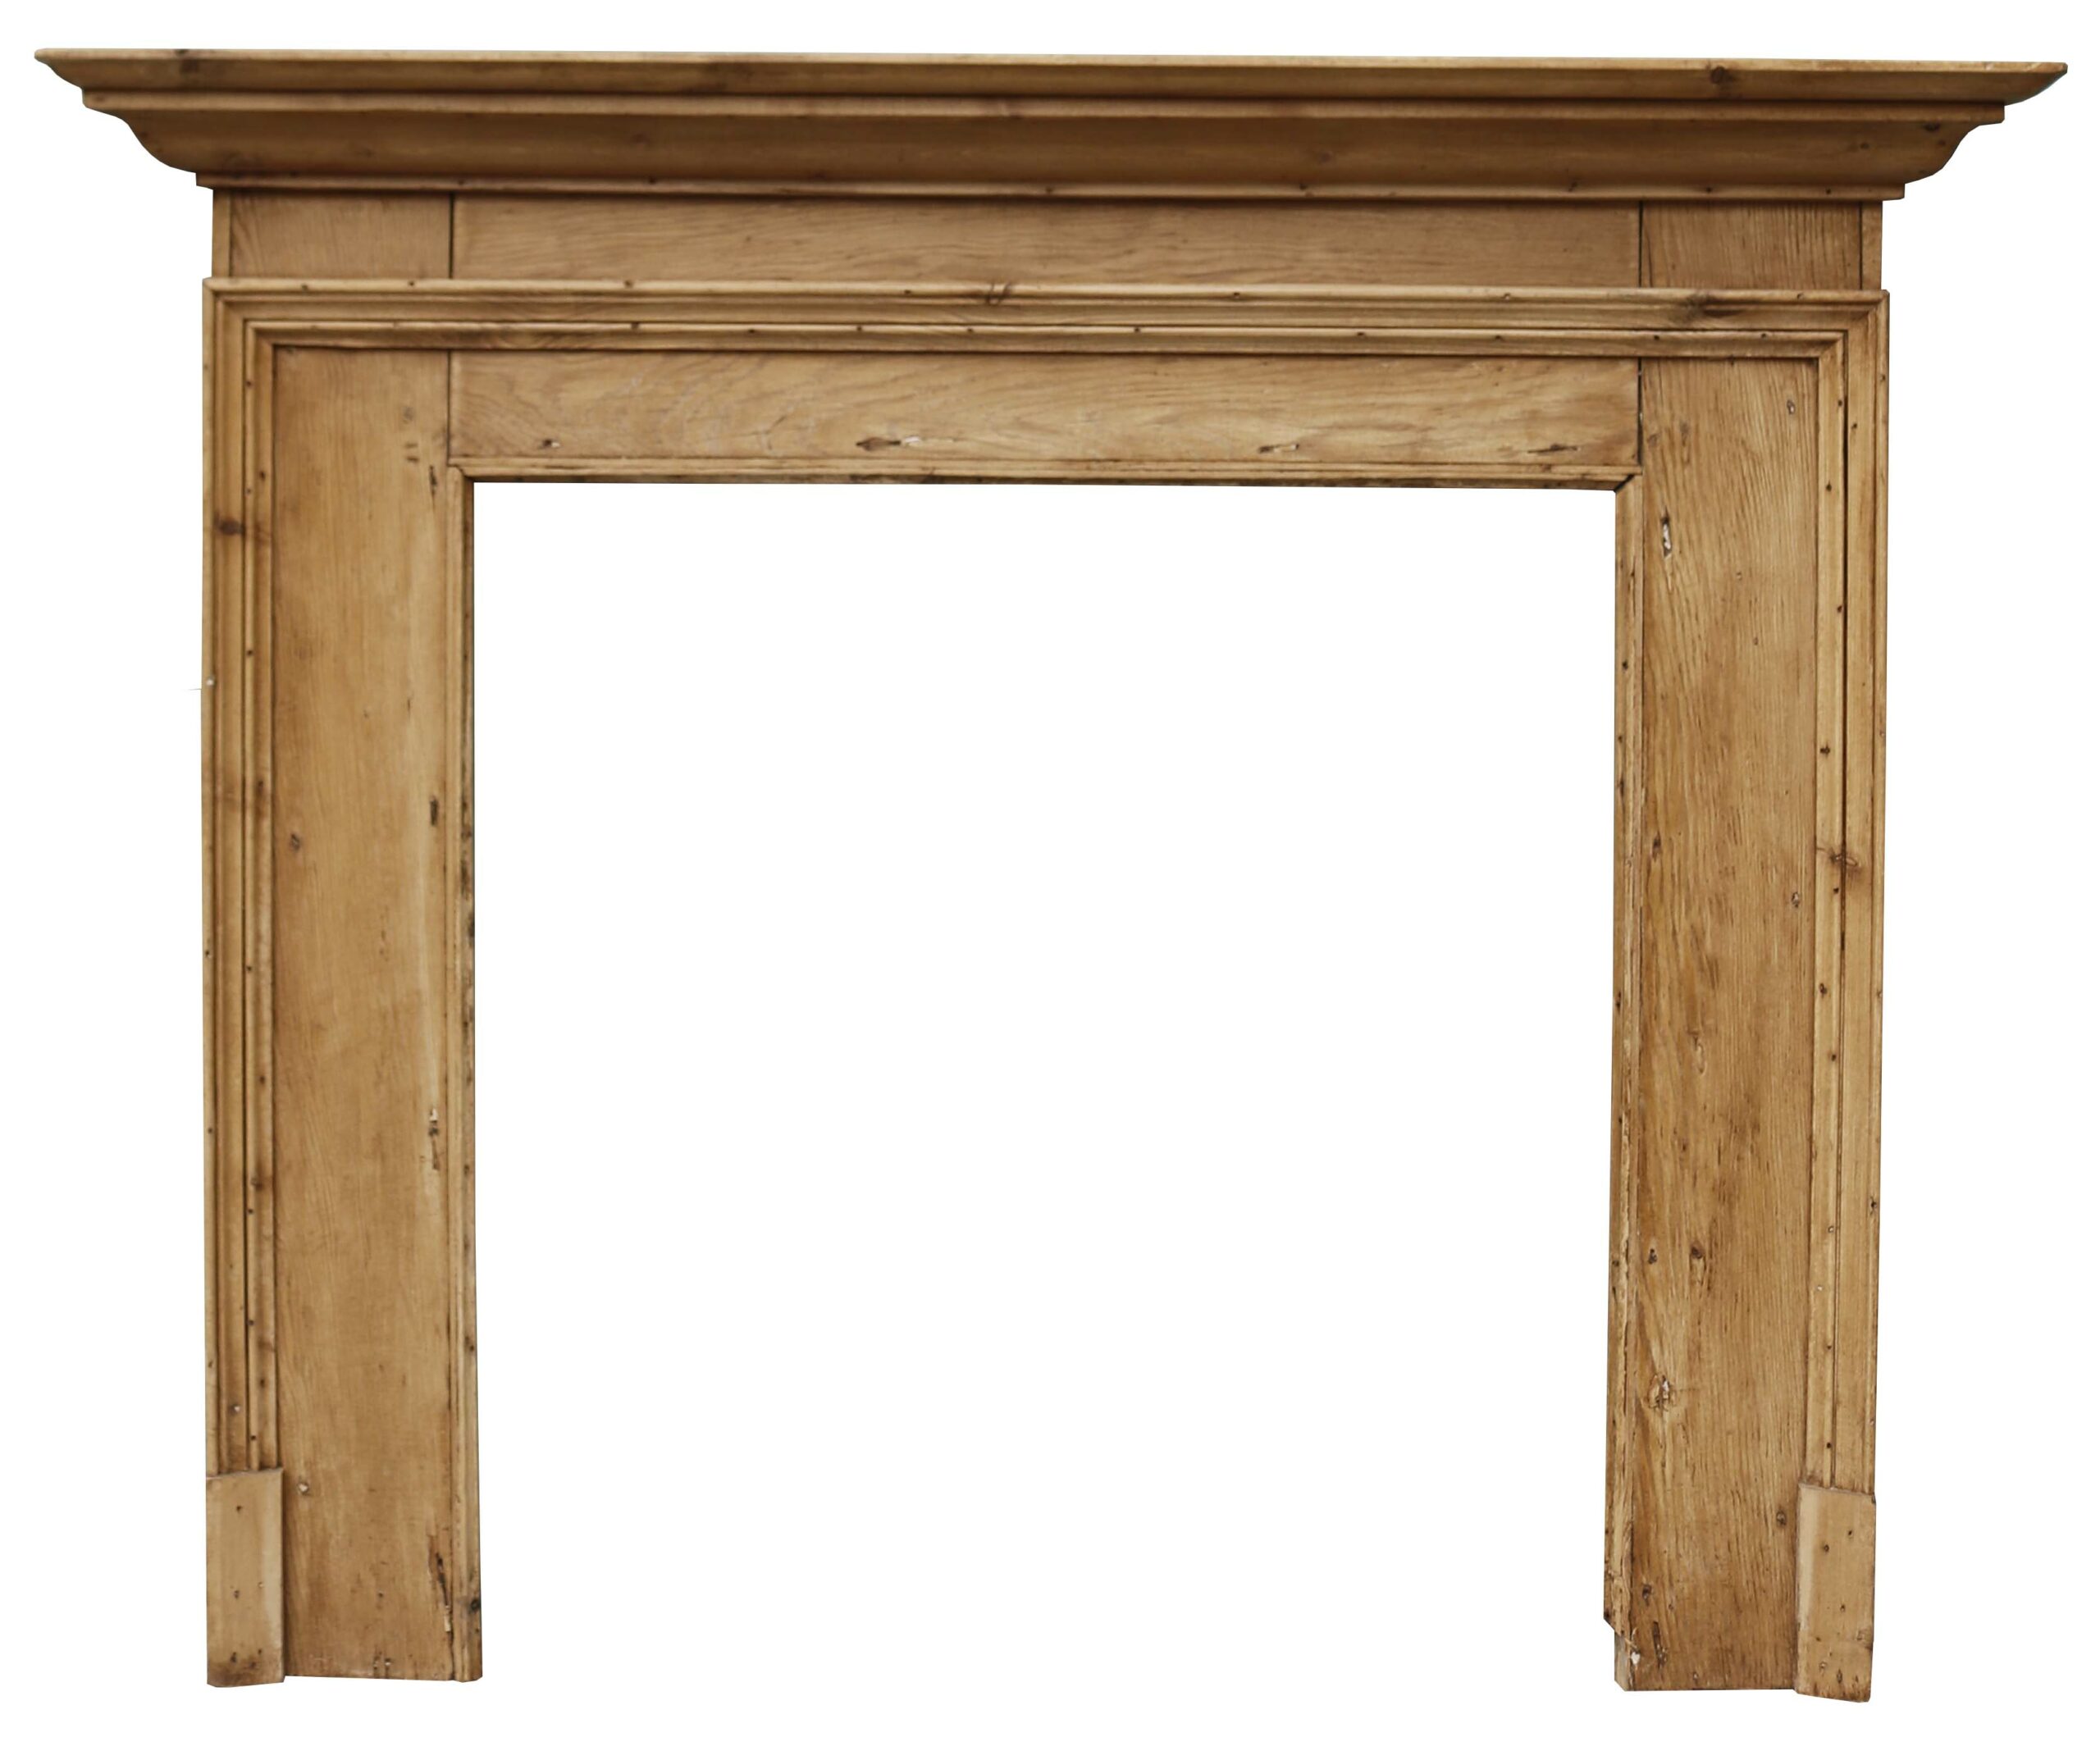 Antique Country Style Timber Fireplace